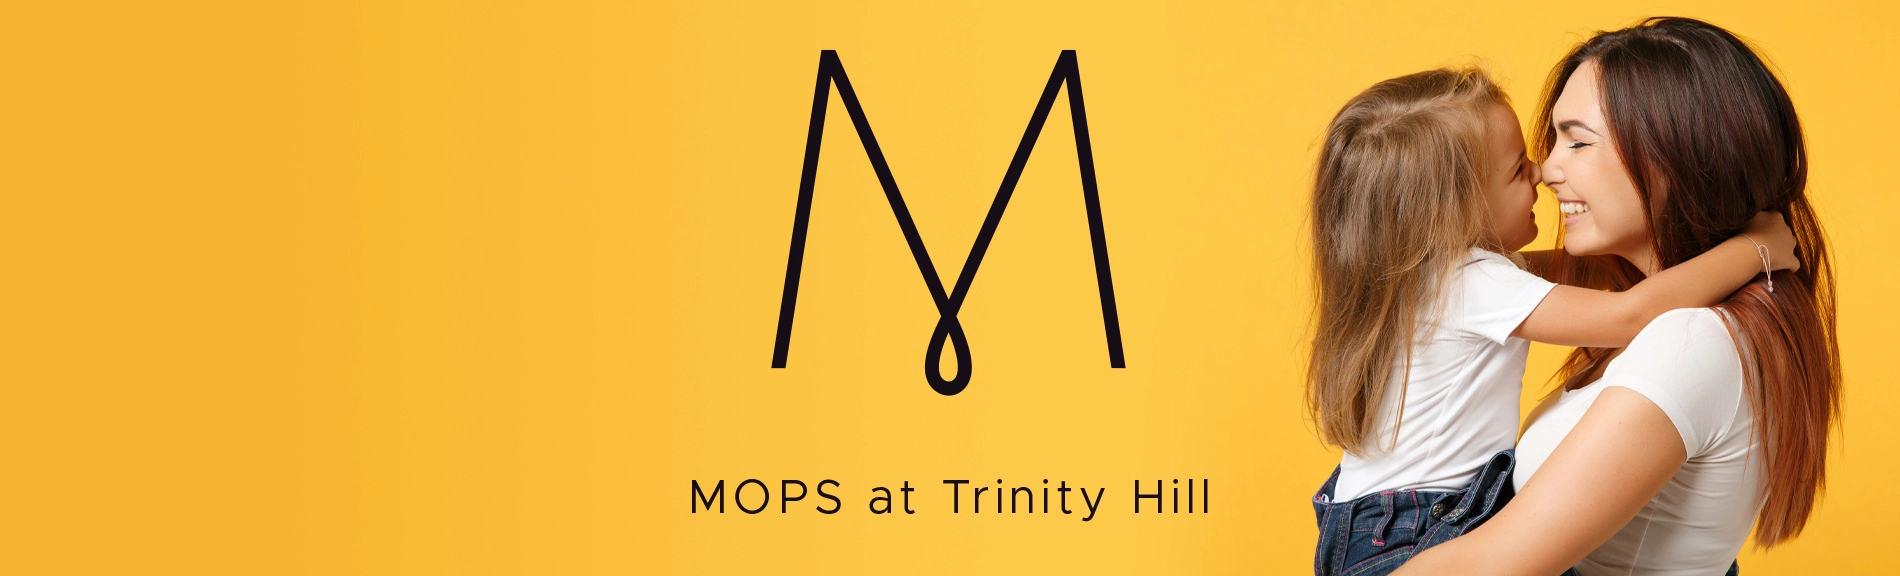 Join MOPS at Trinity Hill Today